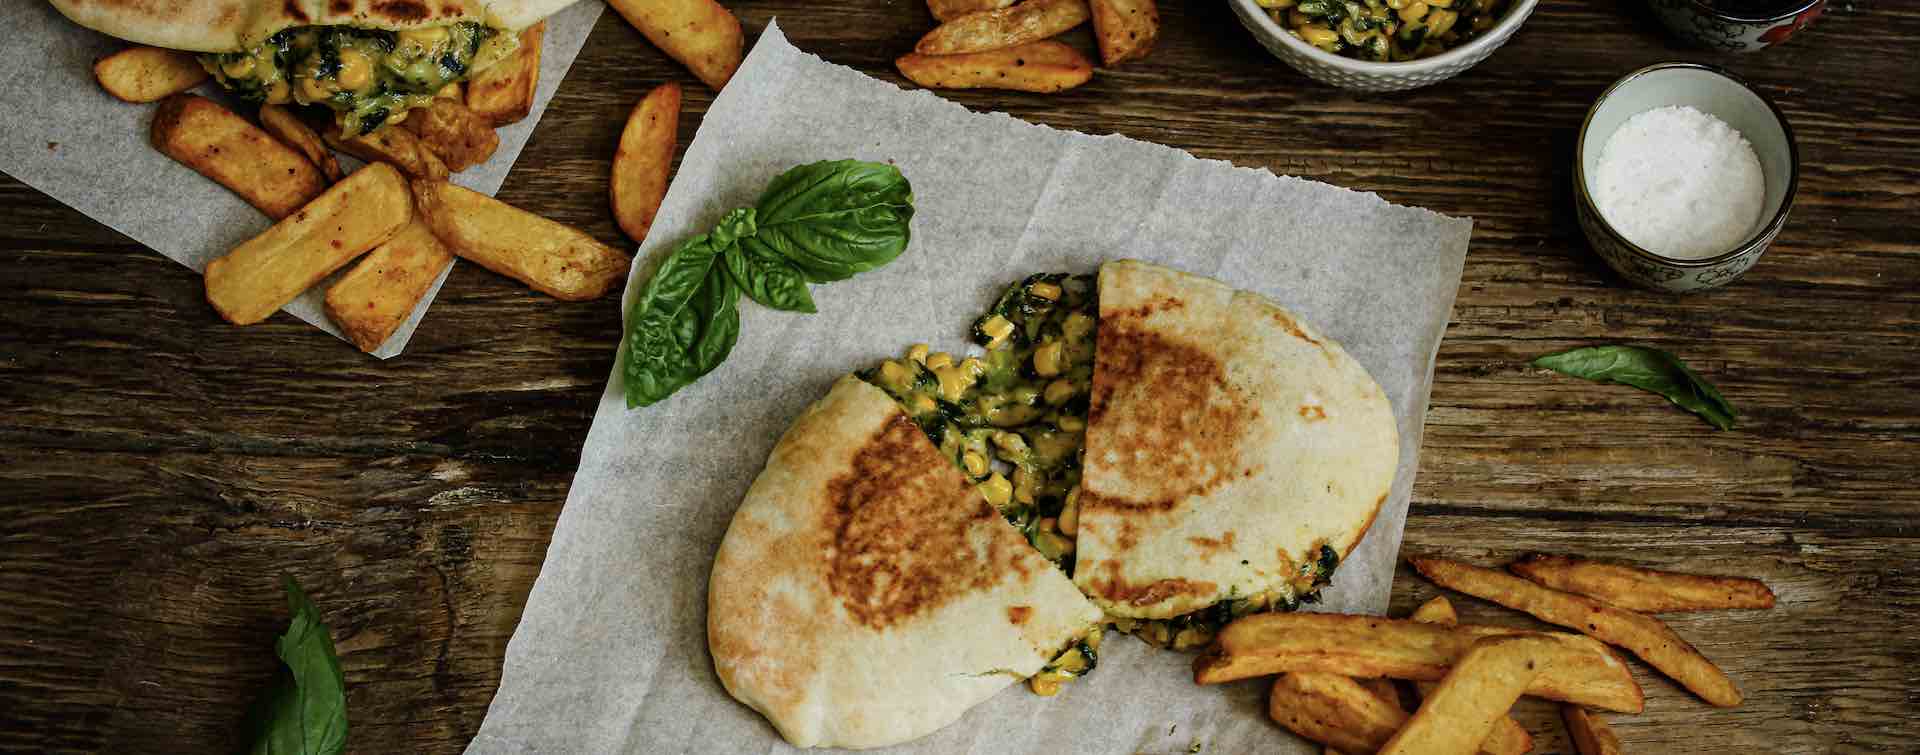 Spinach & Corn Pitas With Oven Chips